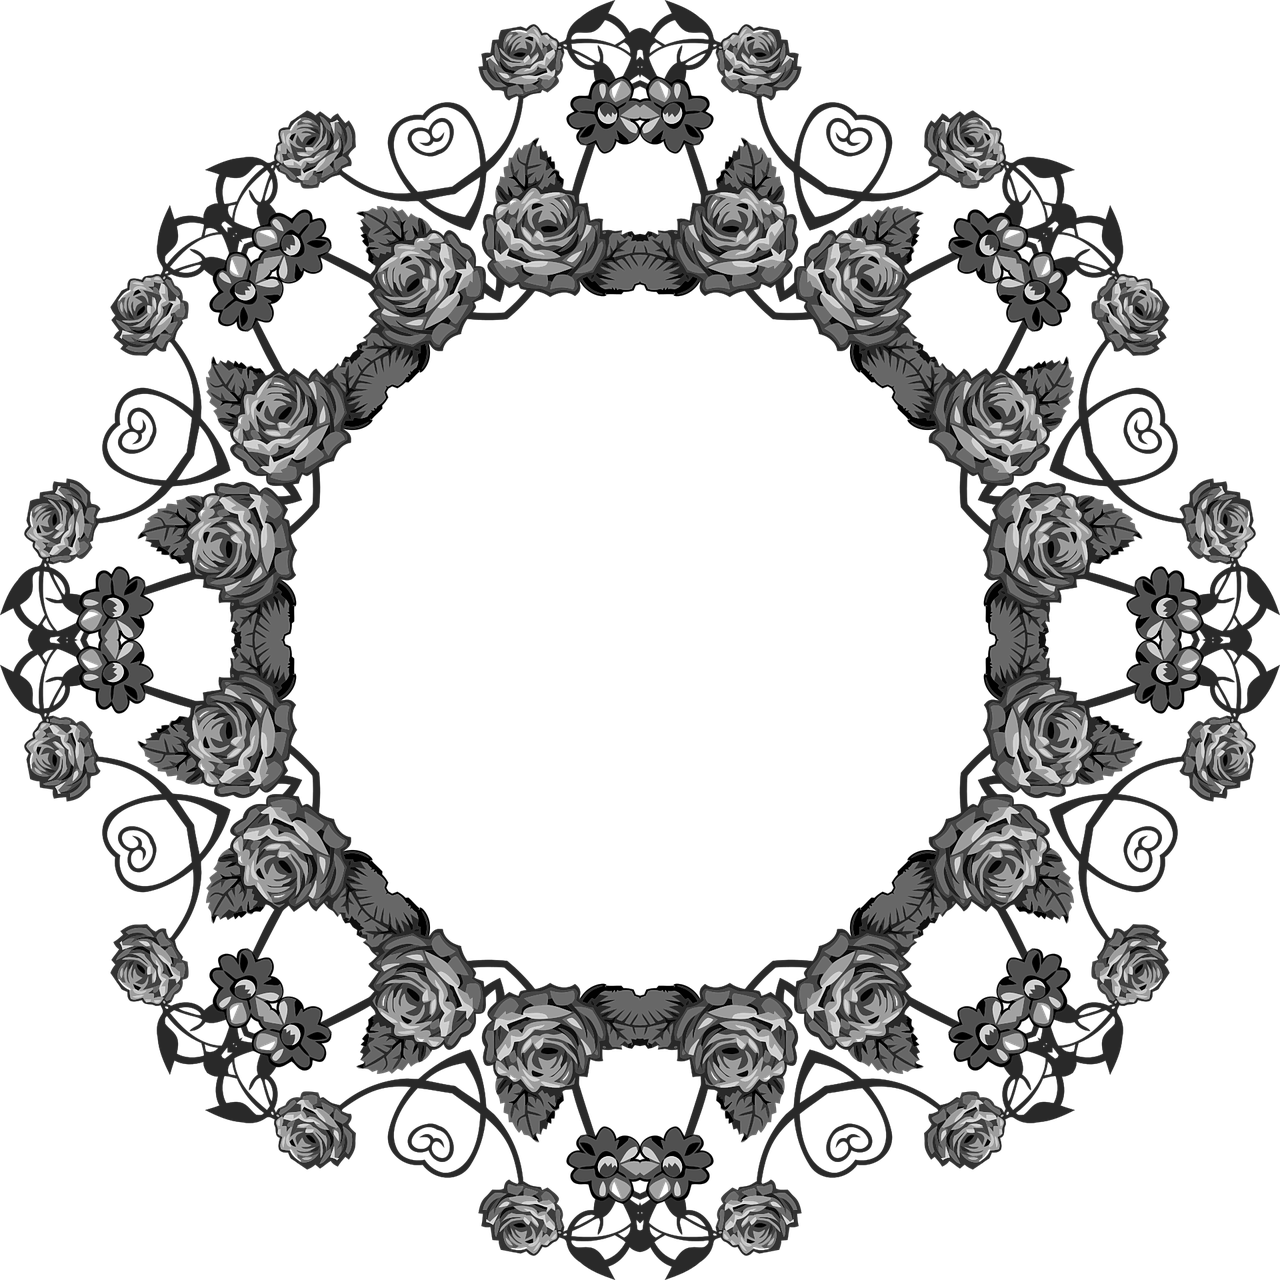 a circular frame with roses on a black background, inspired by Benoit B. Mandelbrot, deviantart, art deco, an old balck and white photo, detailed lacework, image dataset, brocade